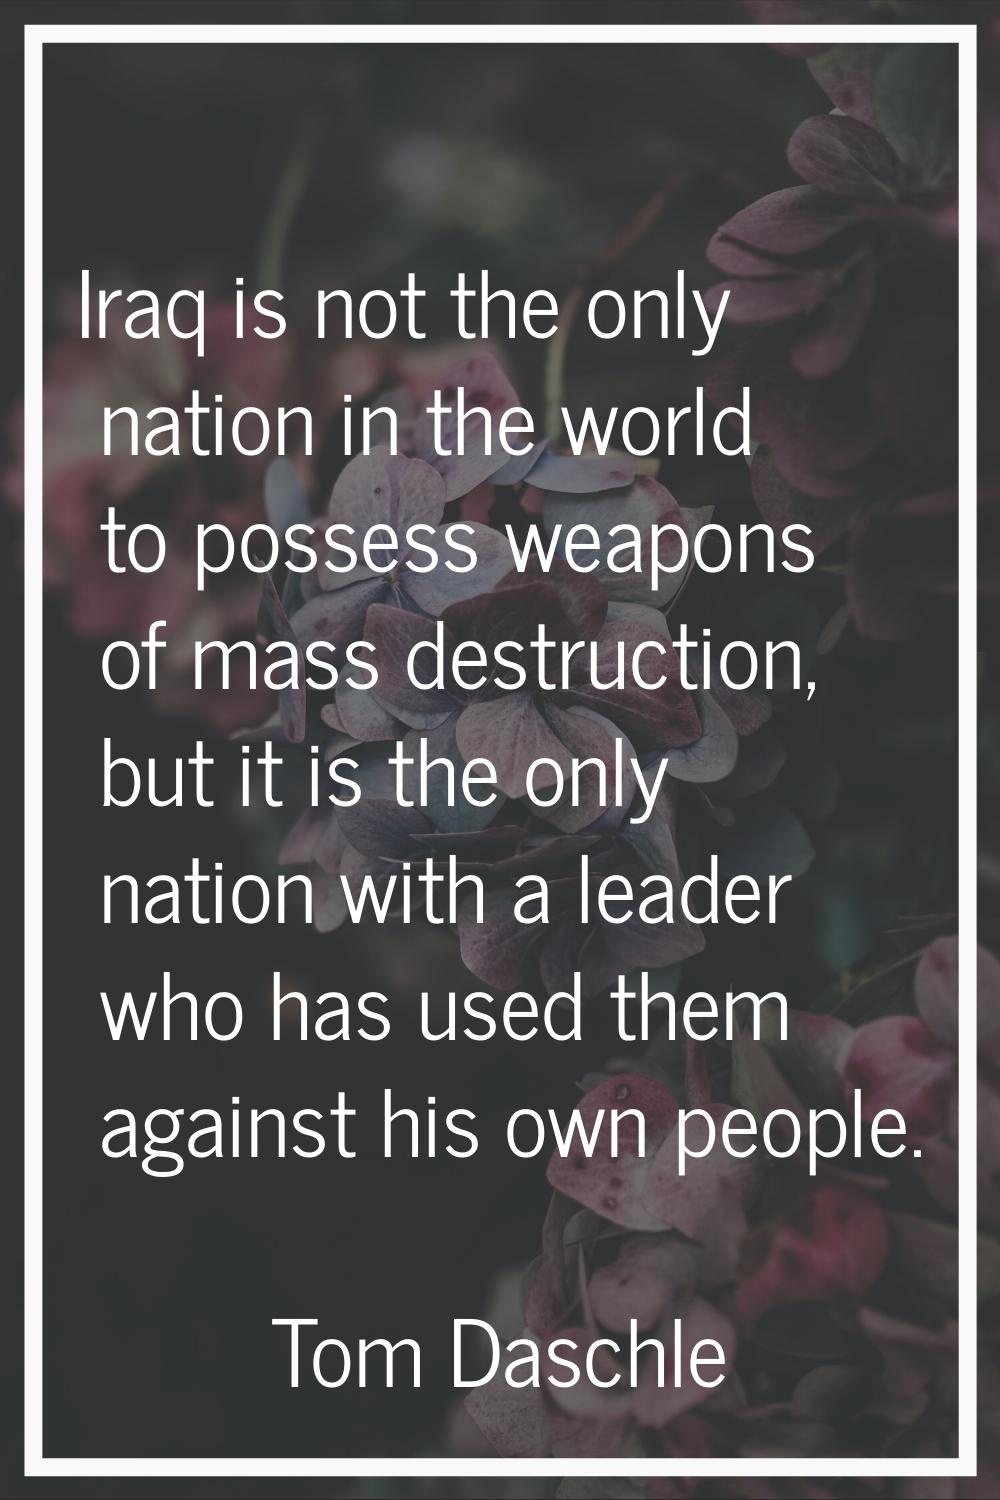 Iraq is not the only nation in the world to possess weapons of mass destruction, but it is the only